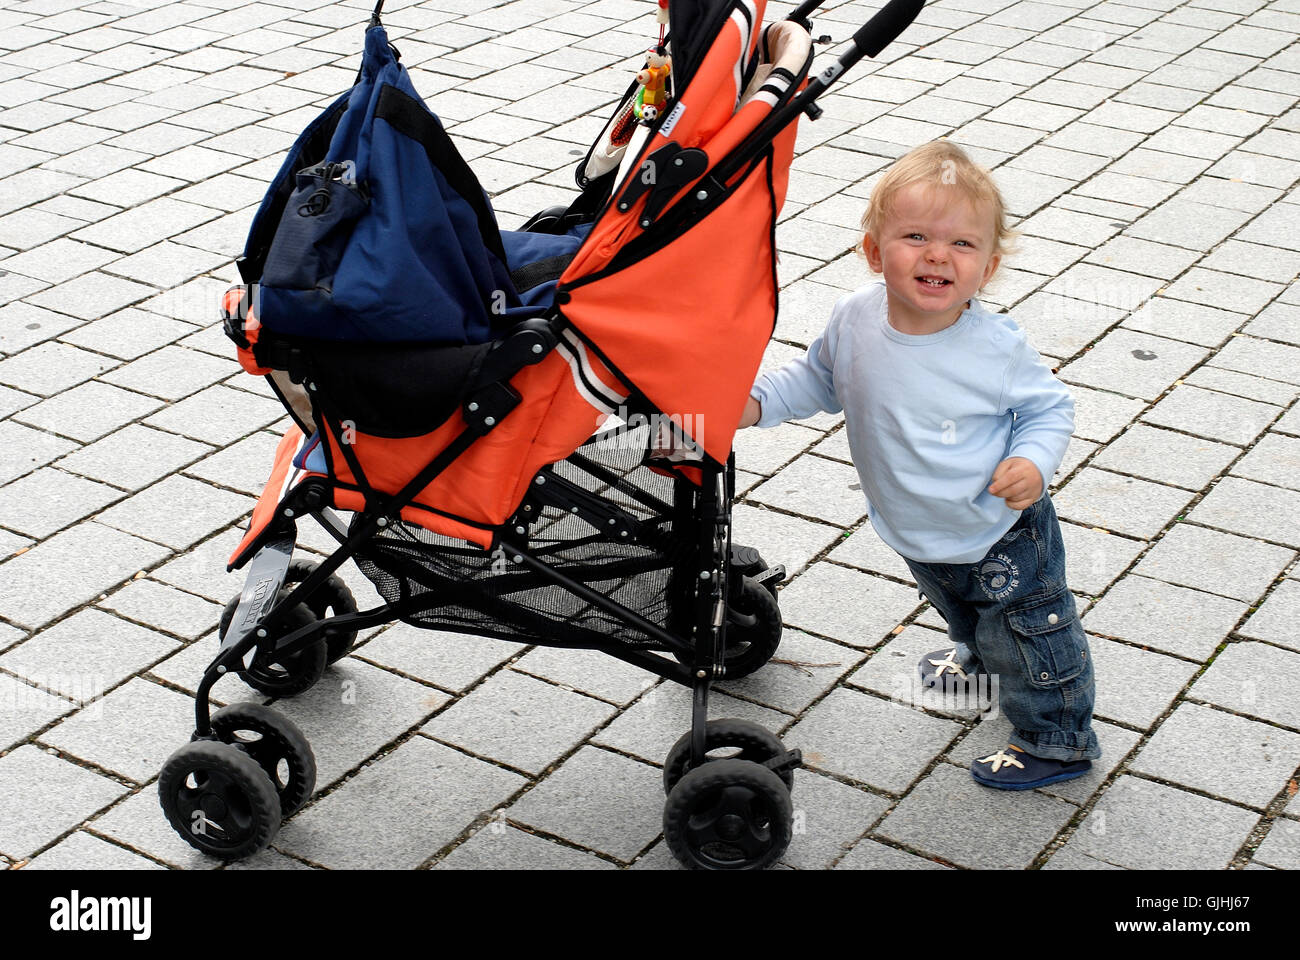 child pushes stroller Stock Photo